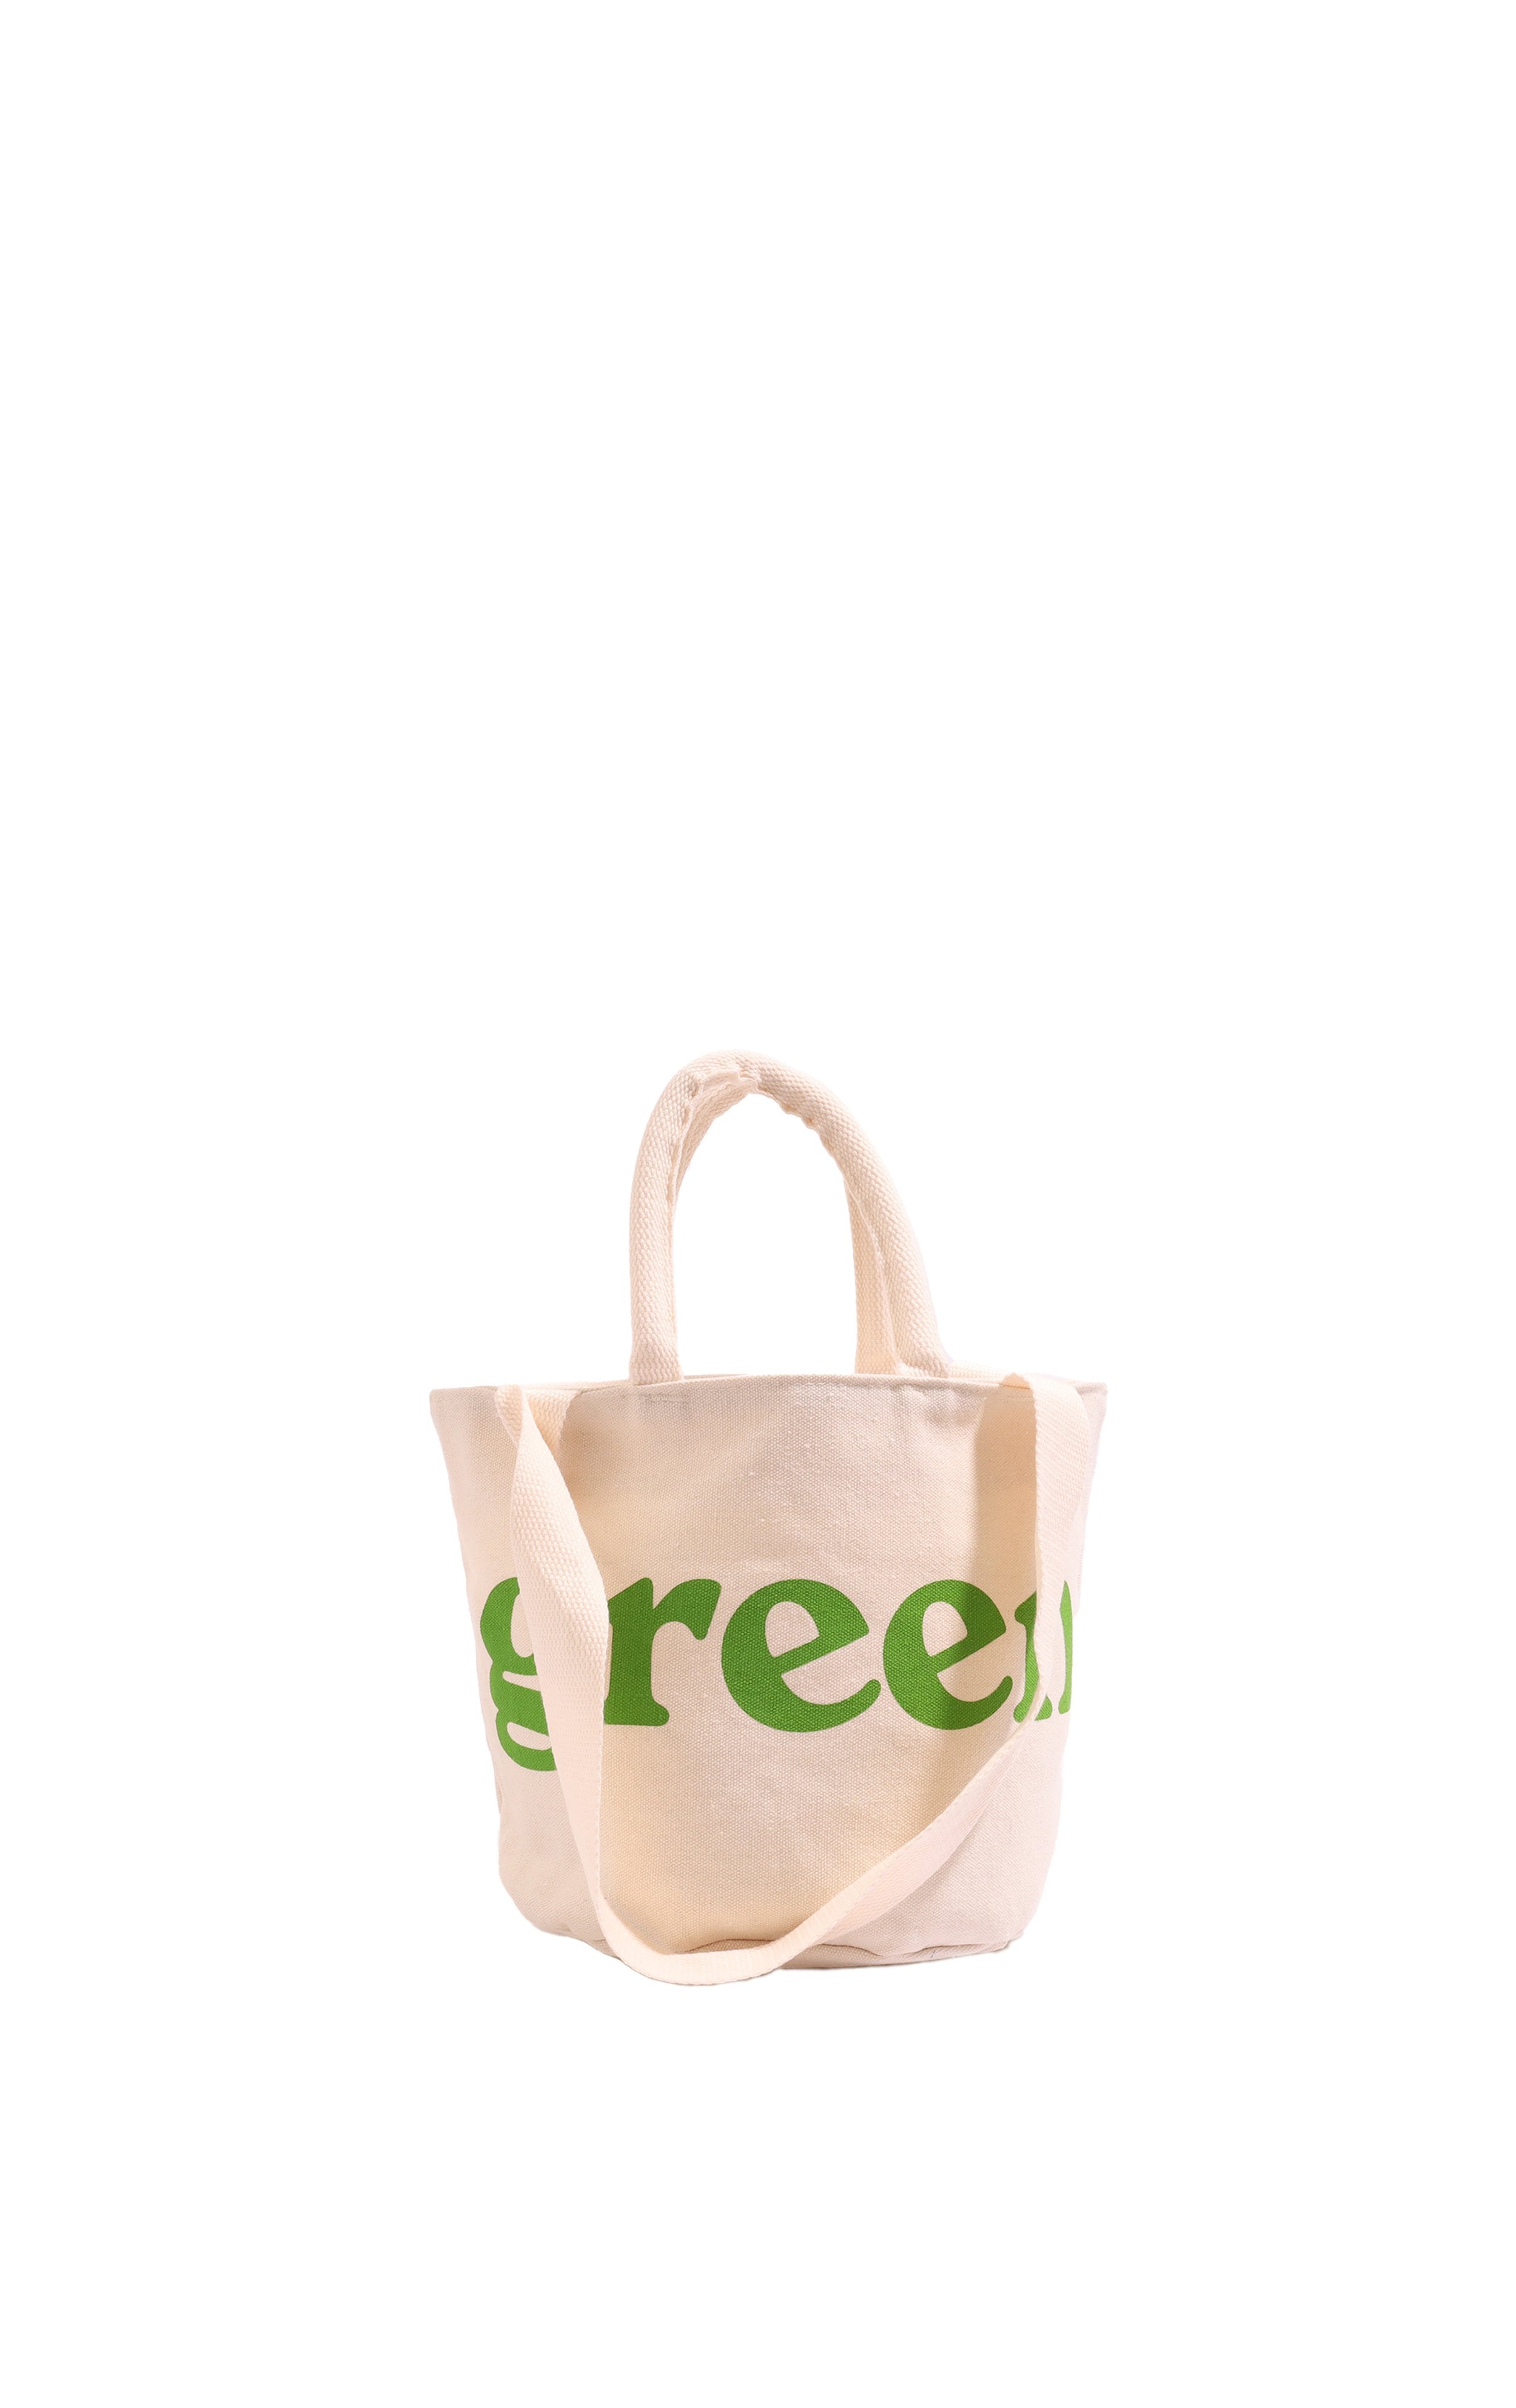 Small Round Tote / Grow Bag - Natural-Mister Green-Mister Green